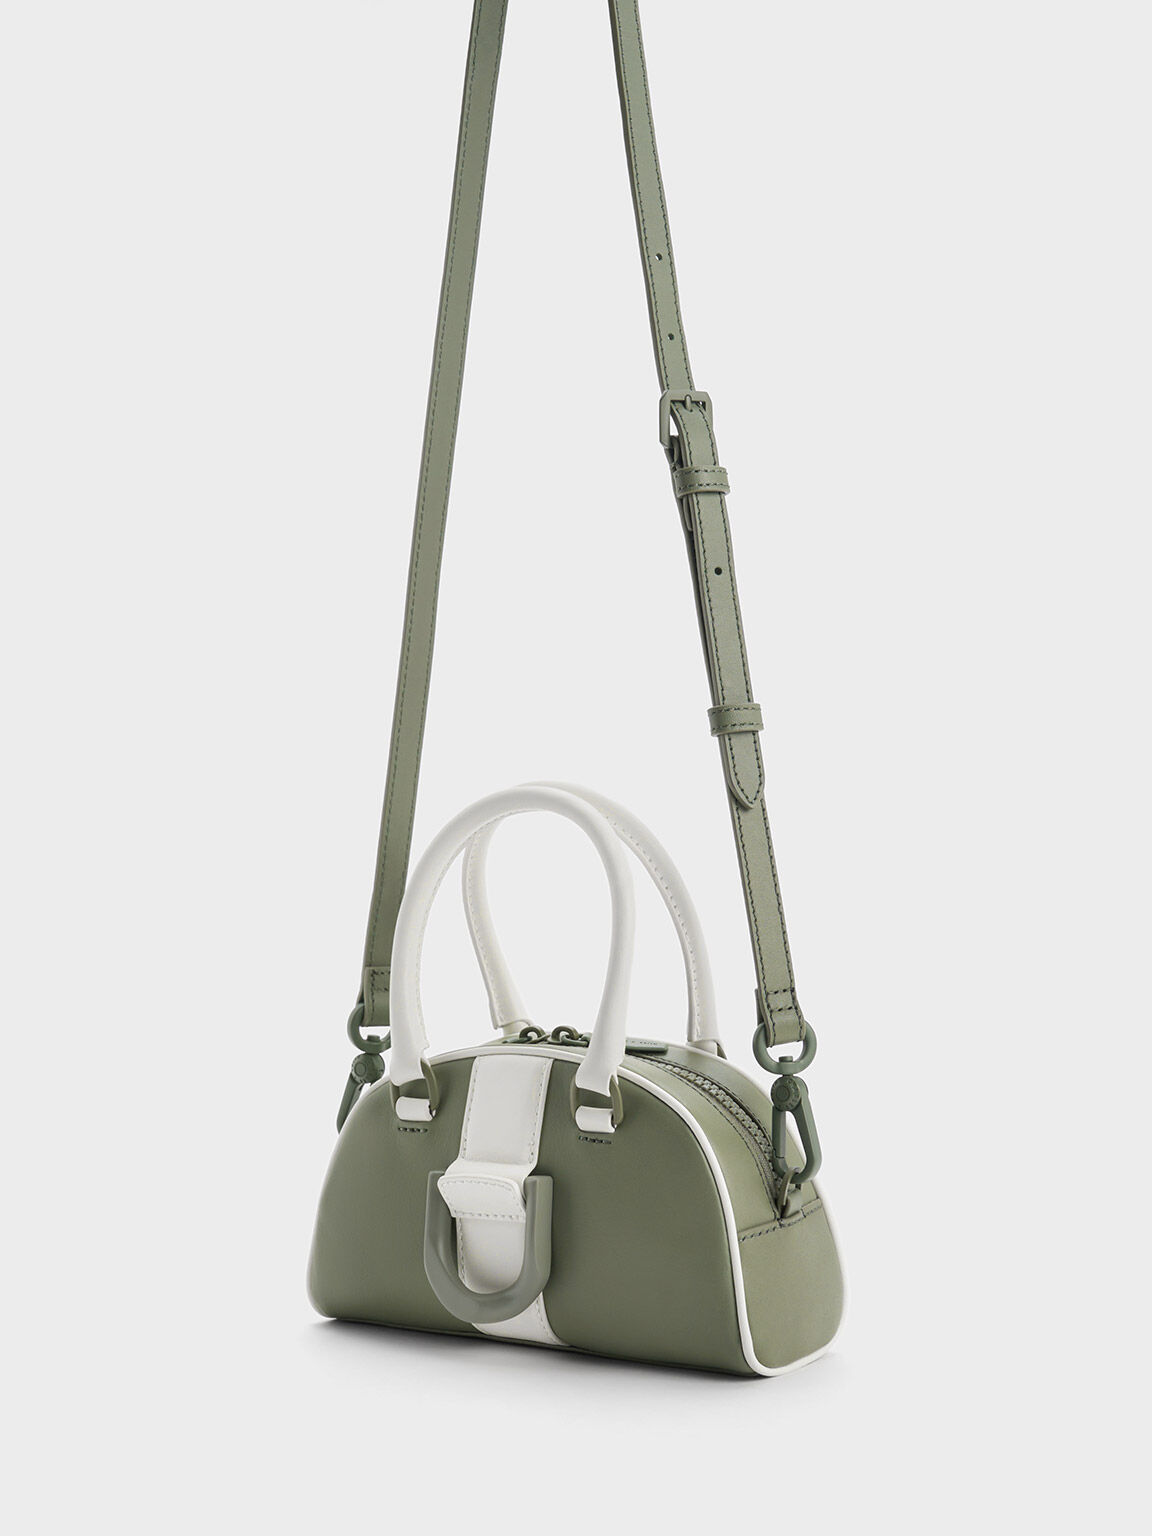 Women's Tote Bags | Shop Exclusive Styles | CHARLES & KEITH US